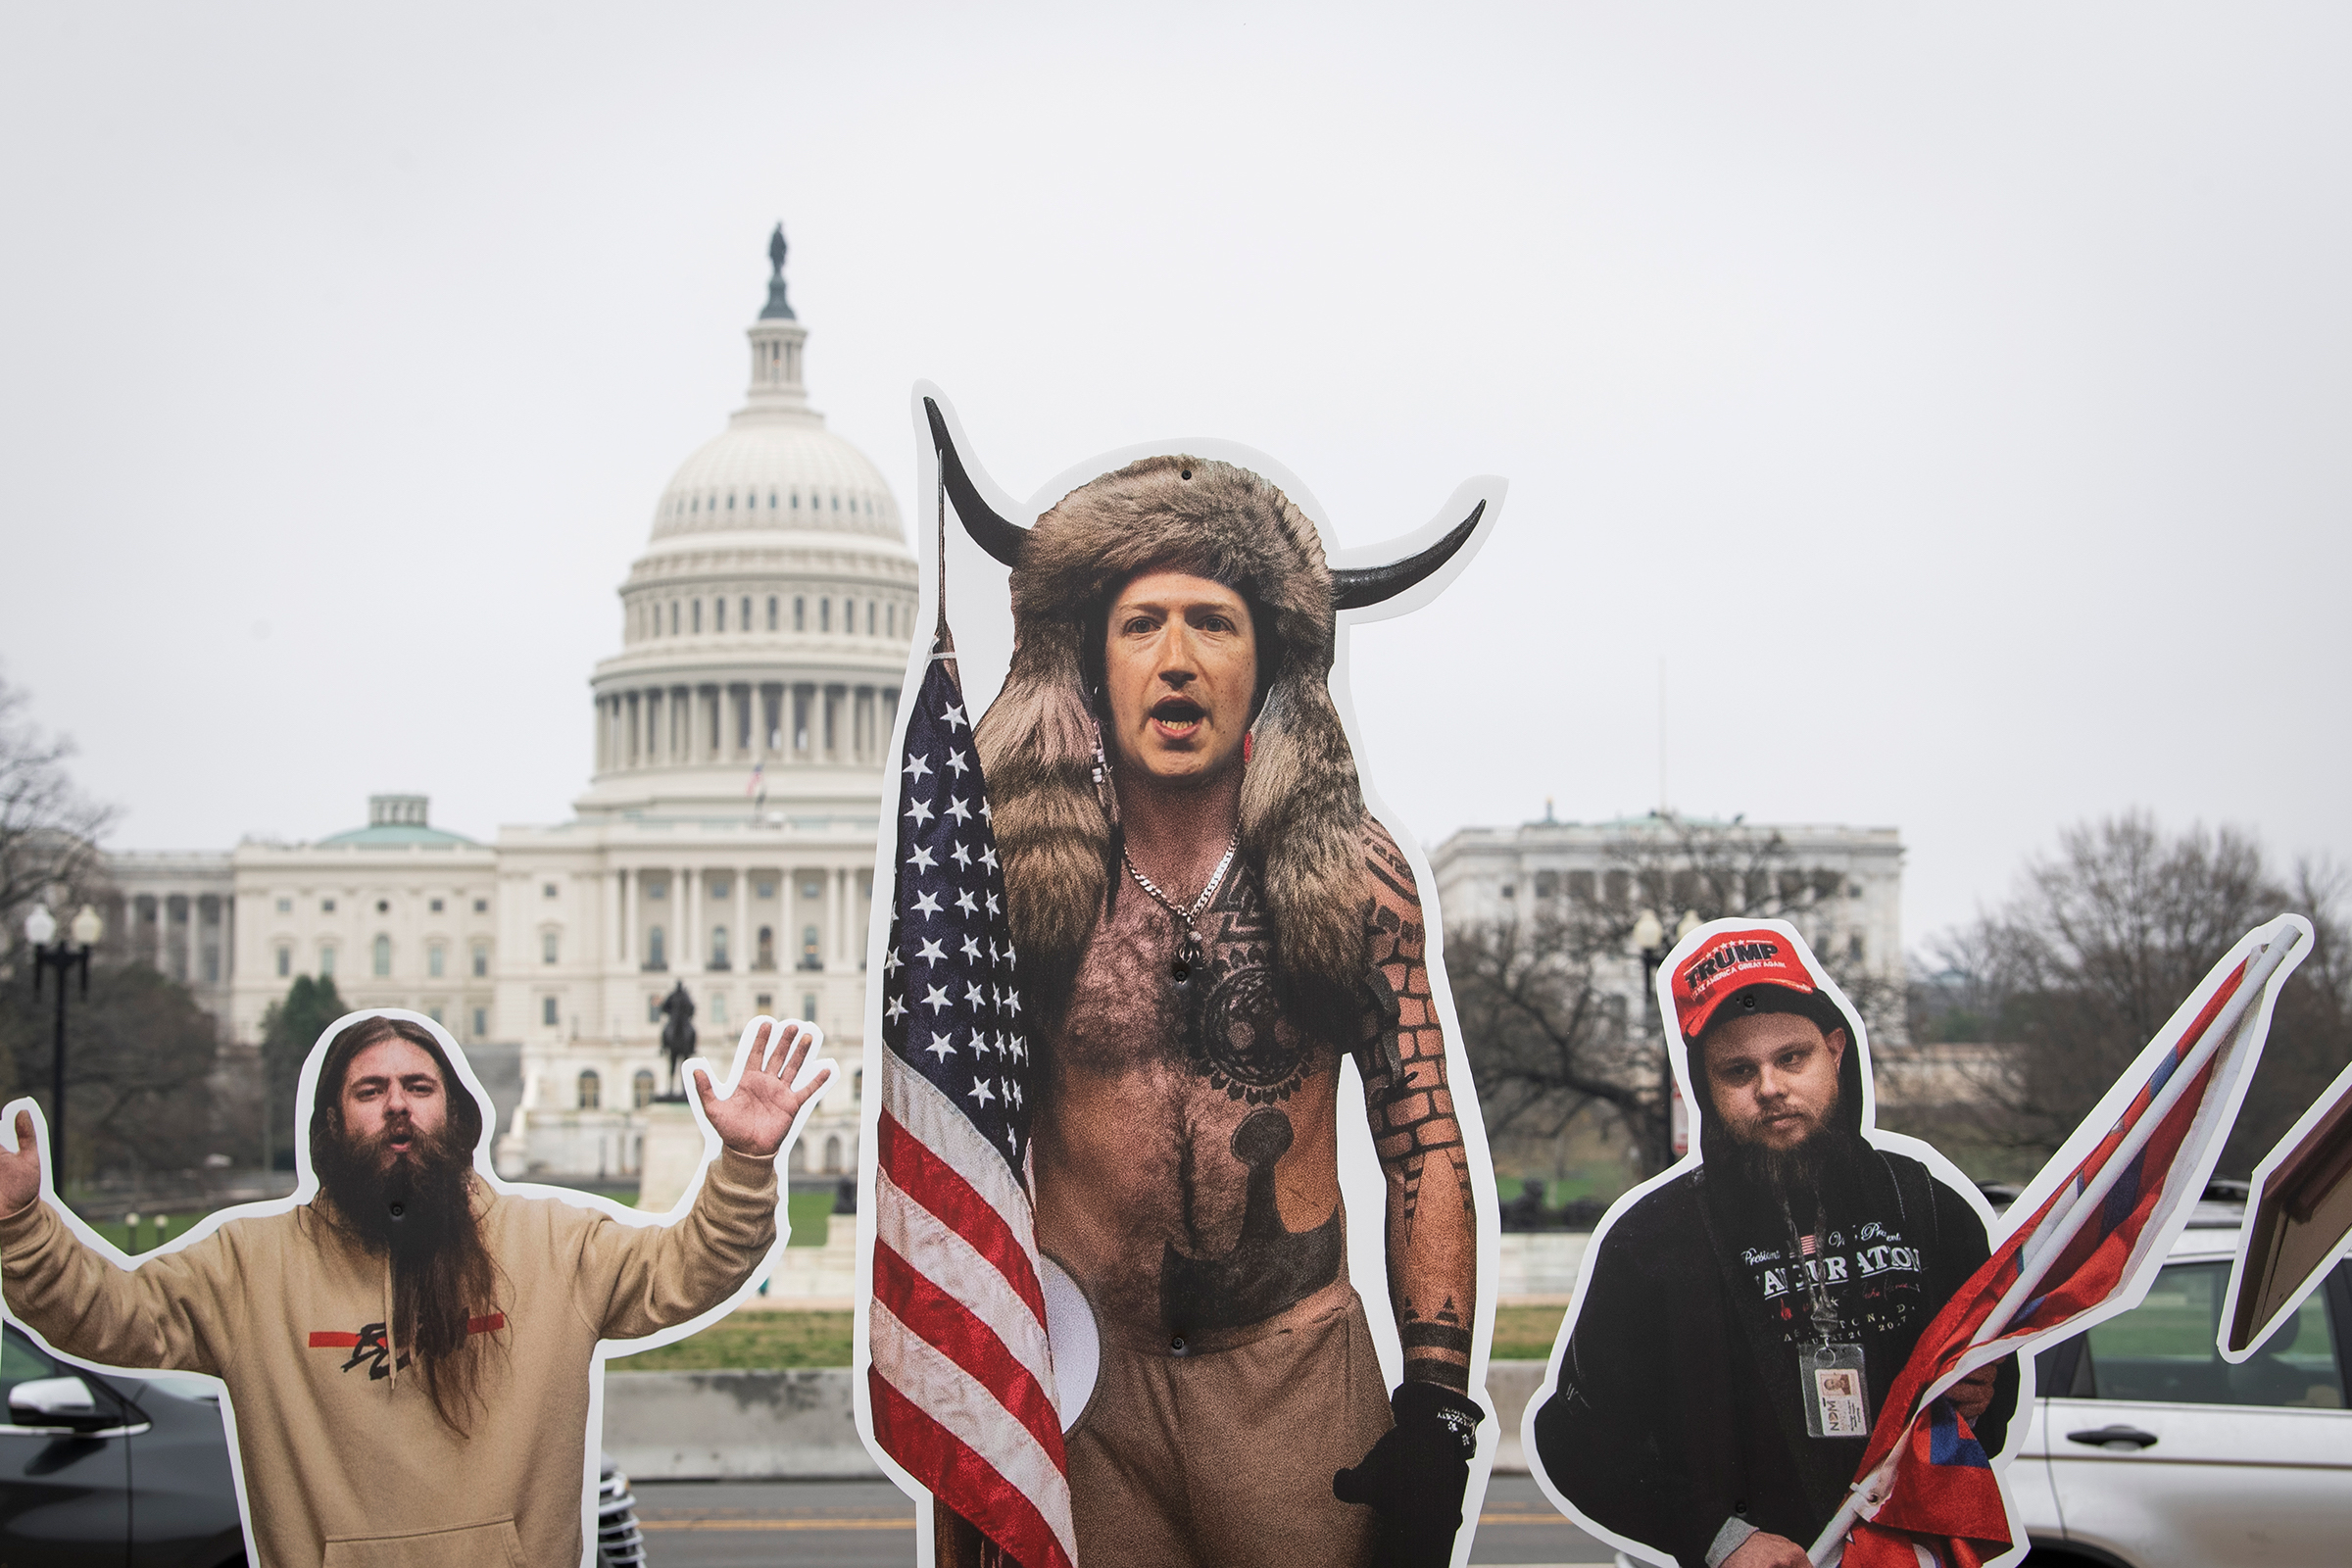 A cardboard cutout of Facebook CEO Mark Zuckerberg, dressed as the QAnon Shaman, along with other cutouts of people involved in the Jan. 6 attack on the Capitol, stand on the National Mall ahead of a House committee hearing on social media and extremism on March 25. The cutouts were placed by the group SumOfUs to highlight the role that social media organizations played in the insurrection.